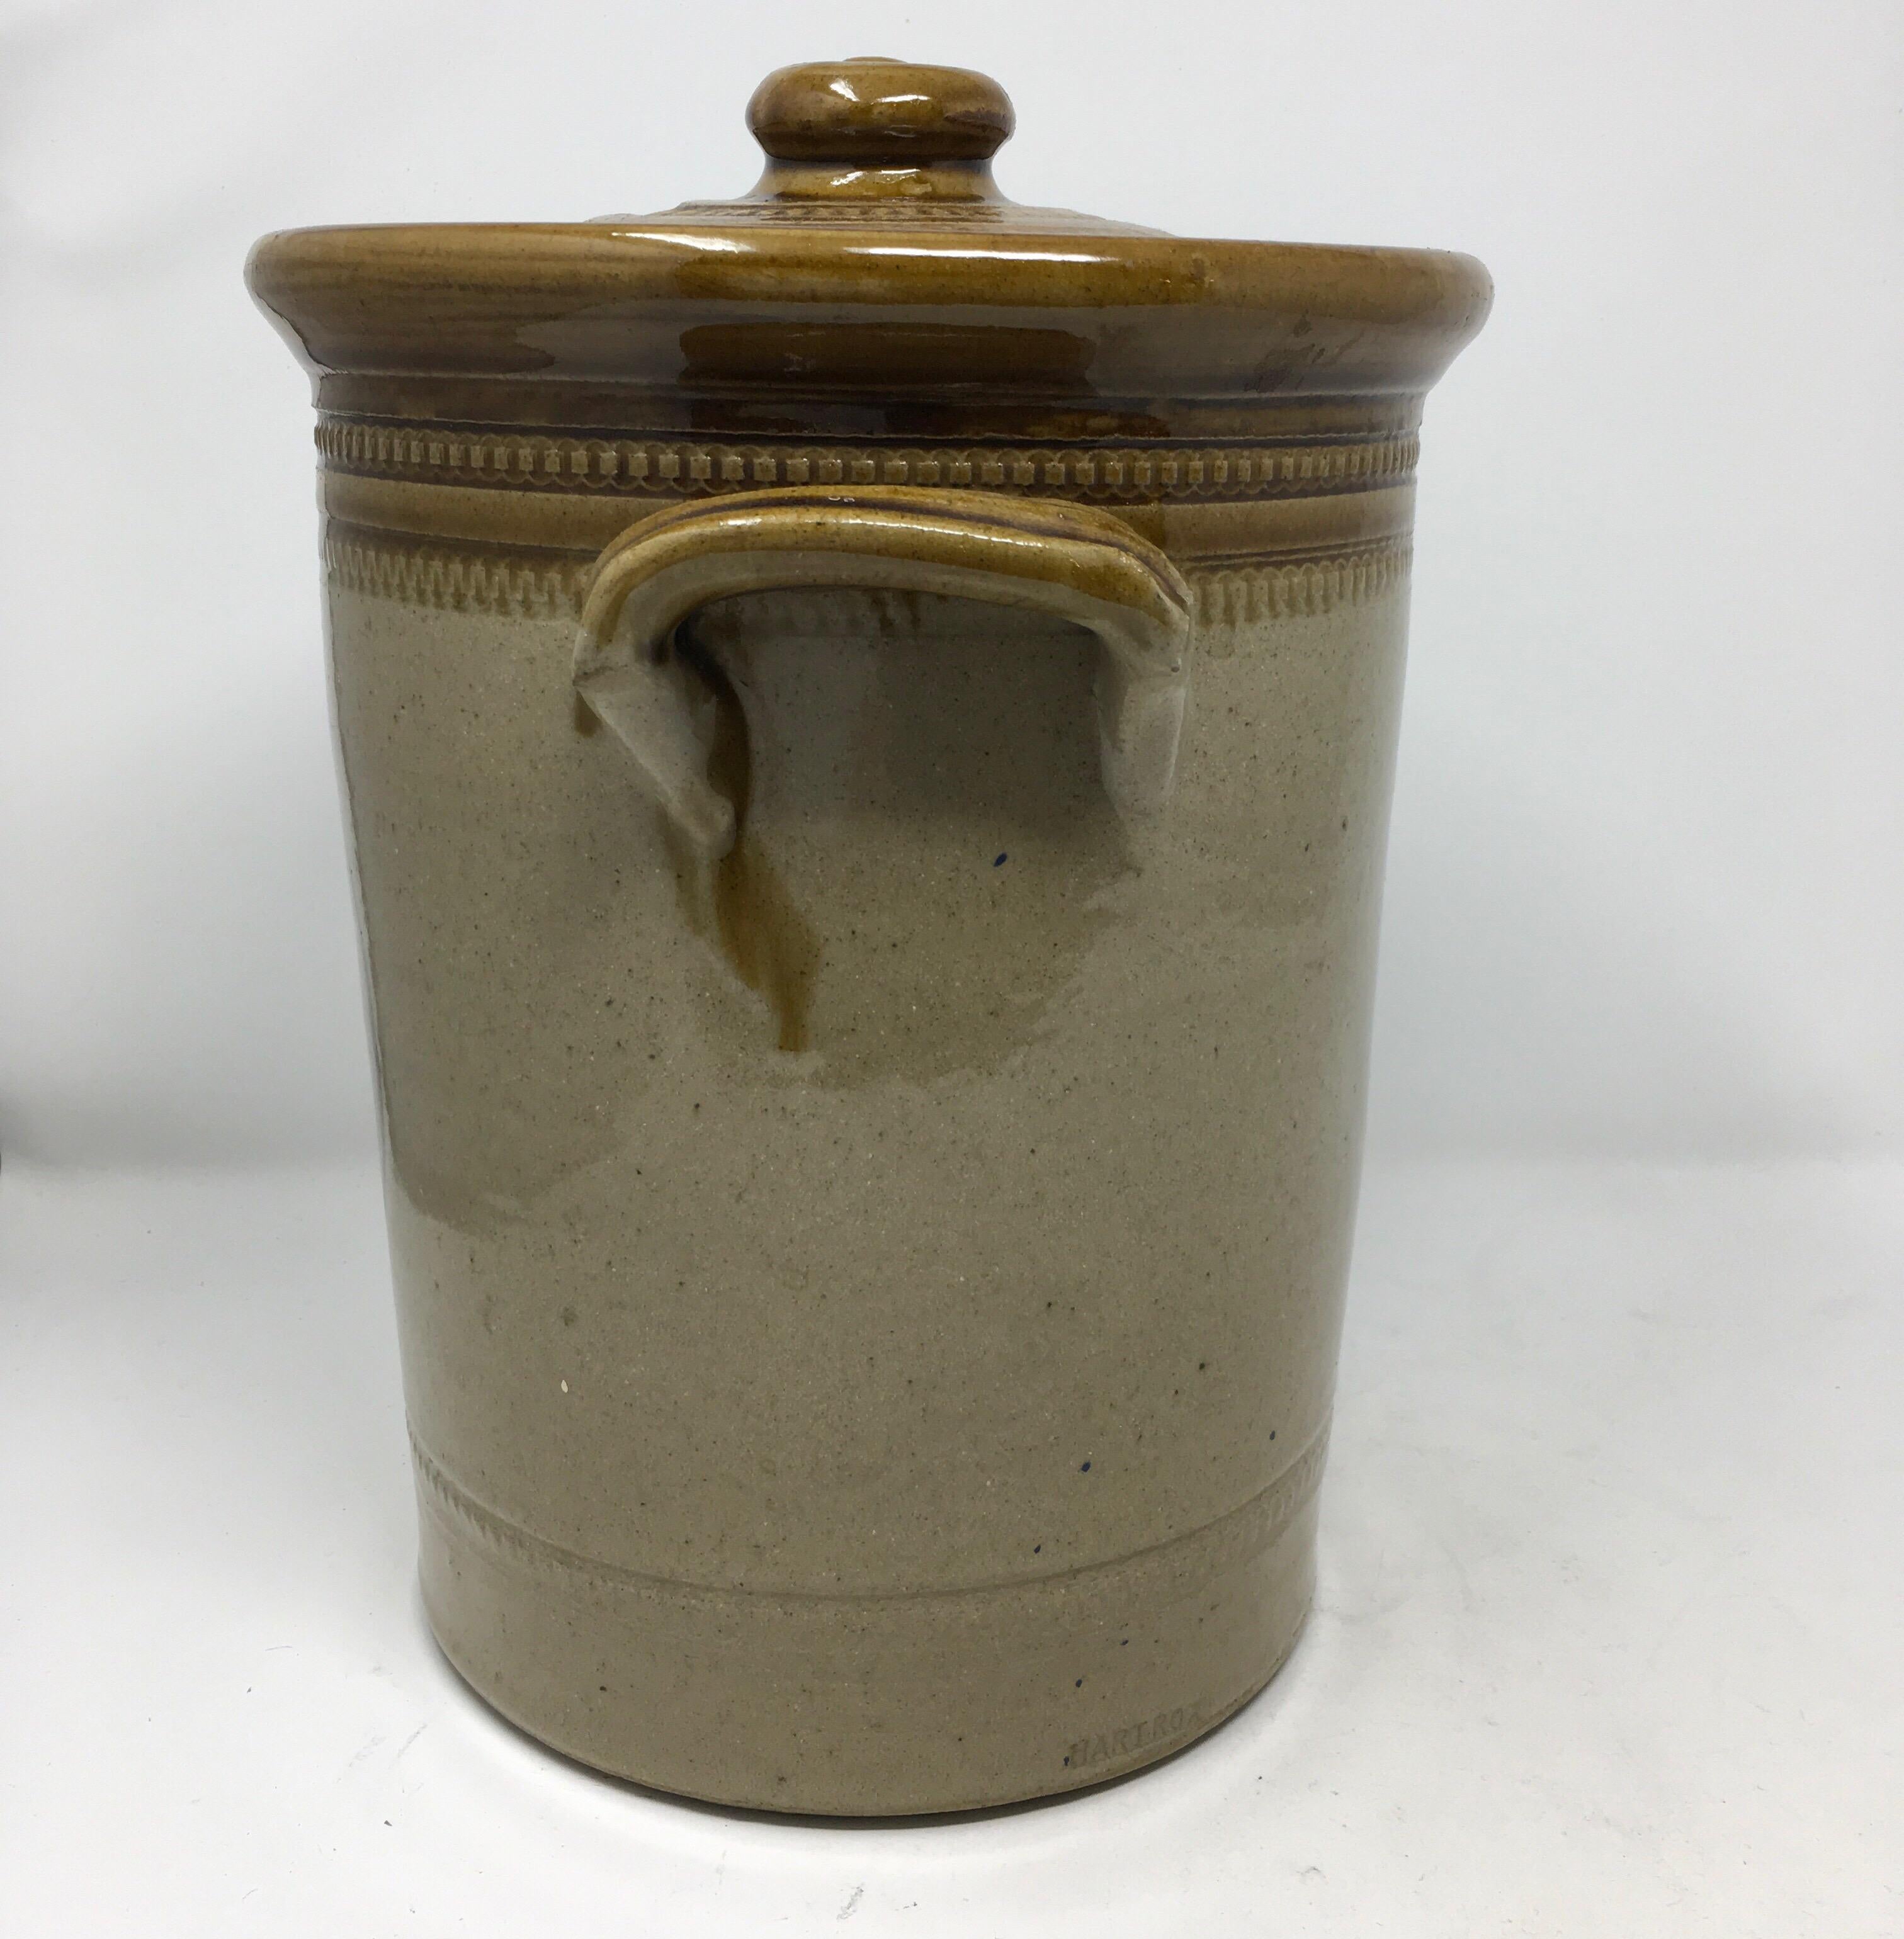 Imported from England, the transfer printed pickled egg crock circa 1920 has two handles and a pictorial of a hen and egg inside of a circle. There is impressed rouletting around and under the rim as well as along the bottom. The crock is complete